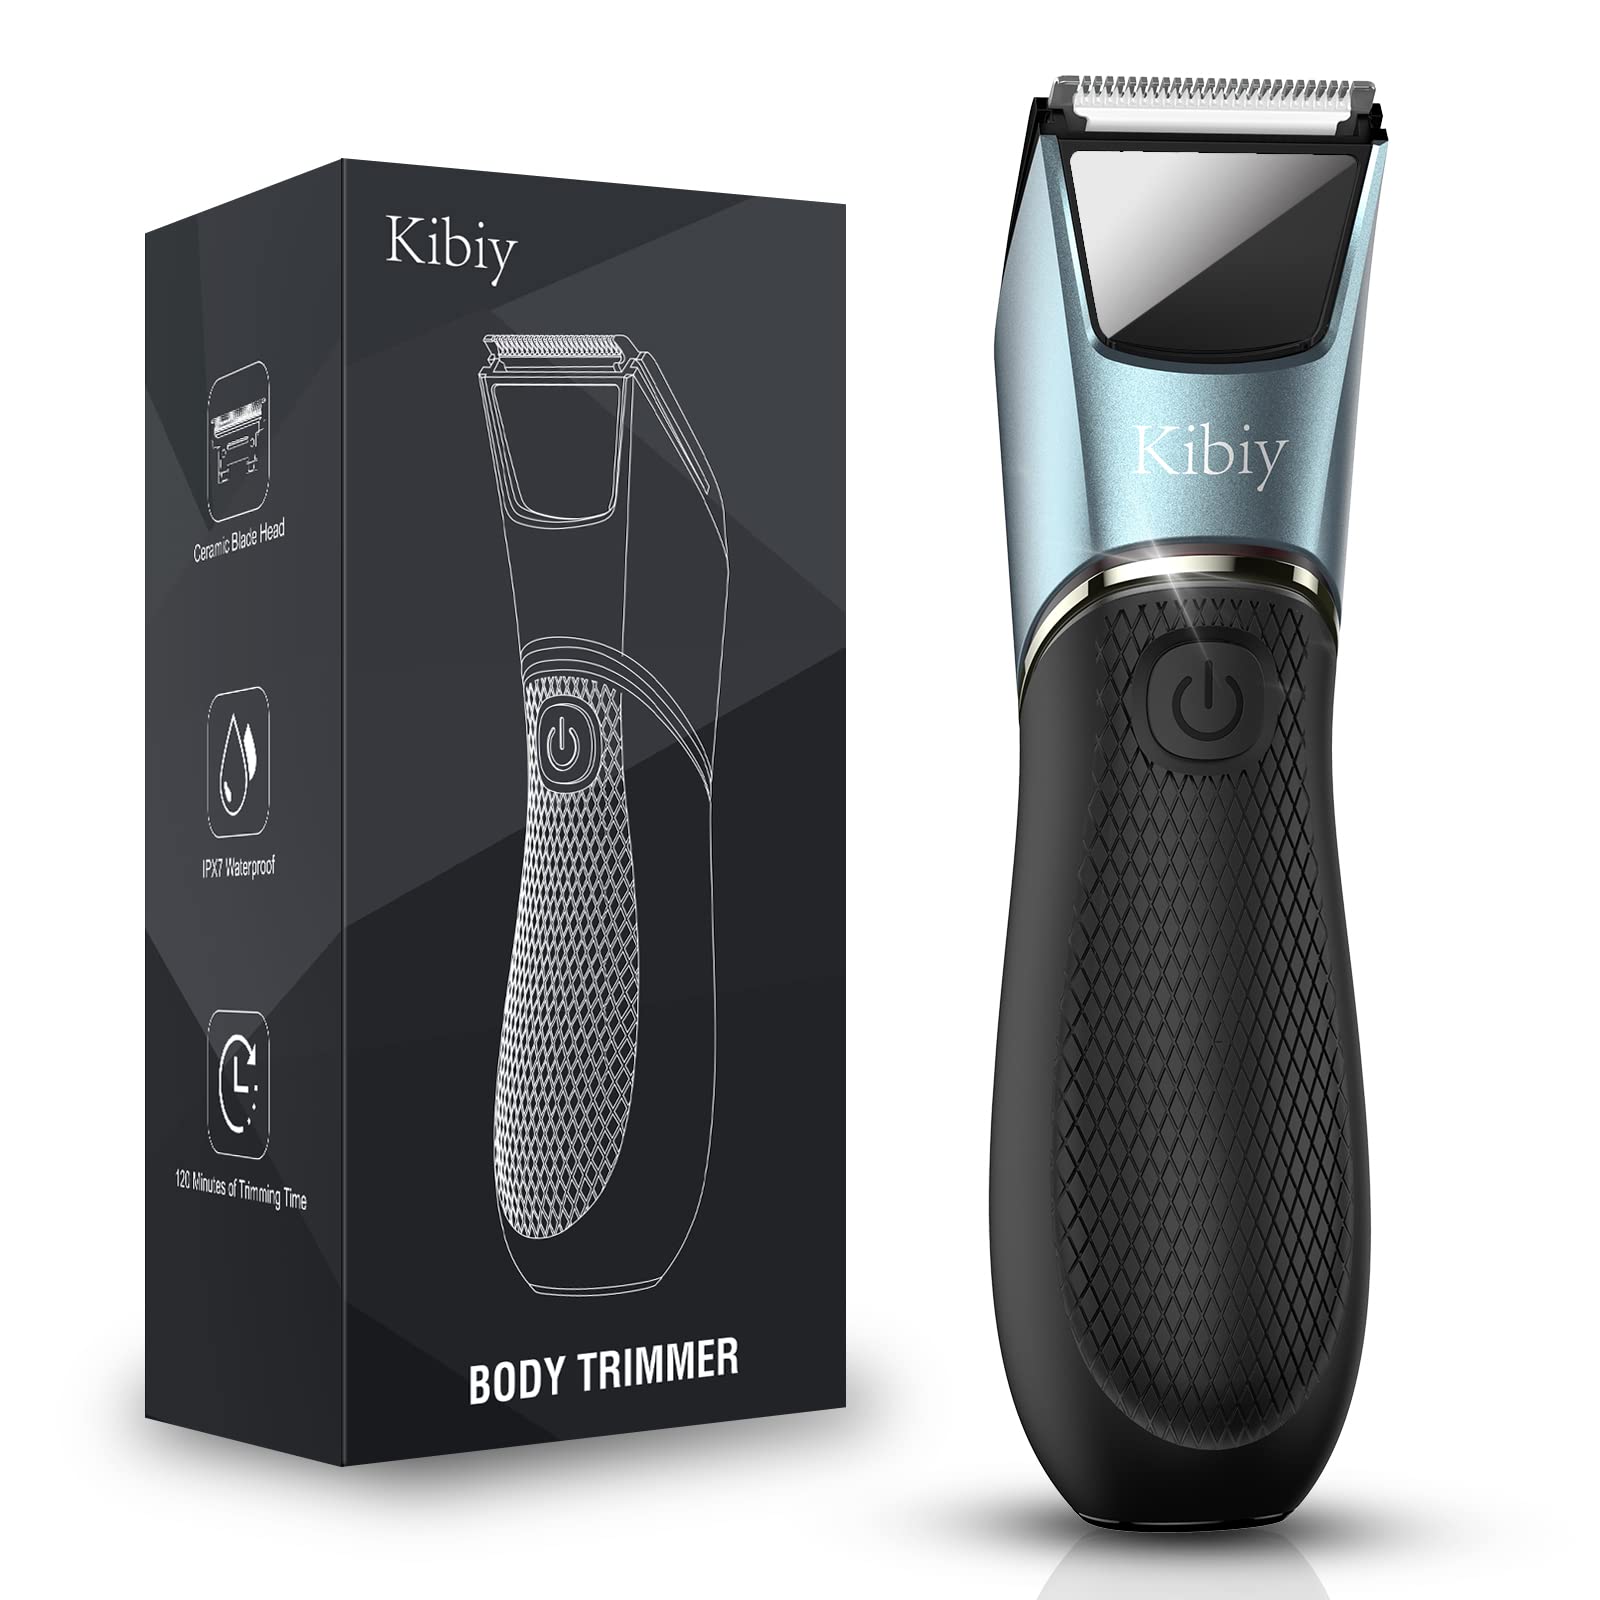 Fremsyn Berolige Blueprint Body Hair Trimmer for Men - Electric Ball Shaver Razor for Pubic Groin Hair  Grooming with Built-in LED Light and Mirror, Ceramic Blade, No Pulls, No  Cuts, Waterproof Wet/ Dry Cordless Use